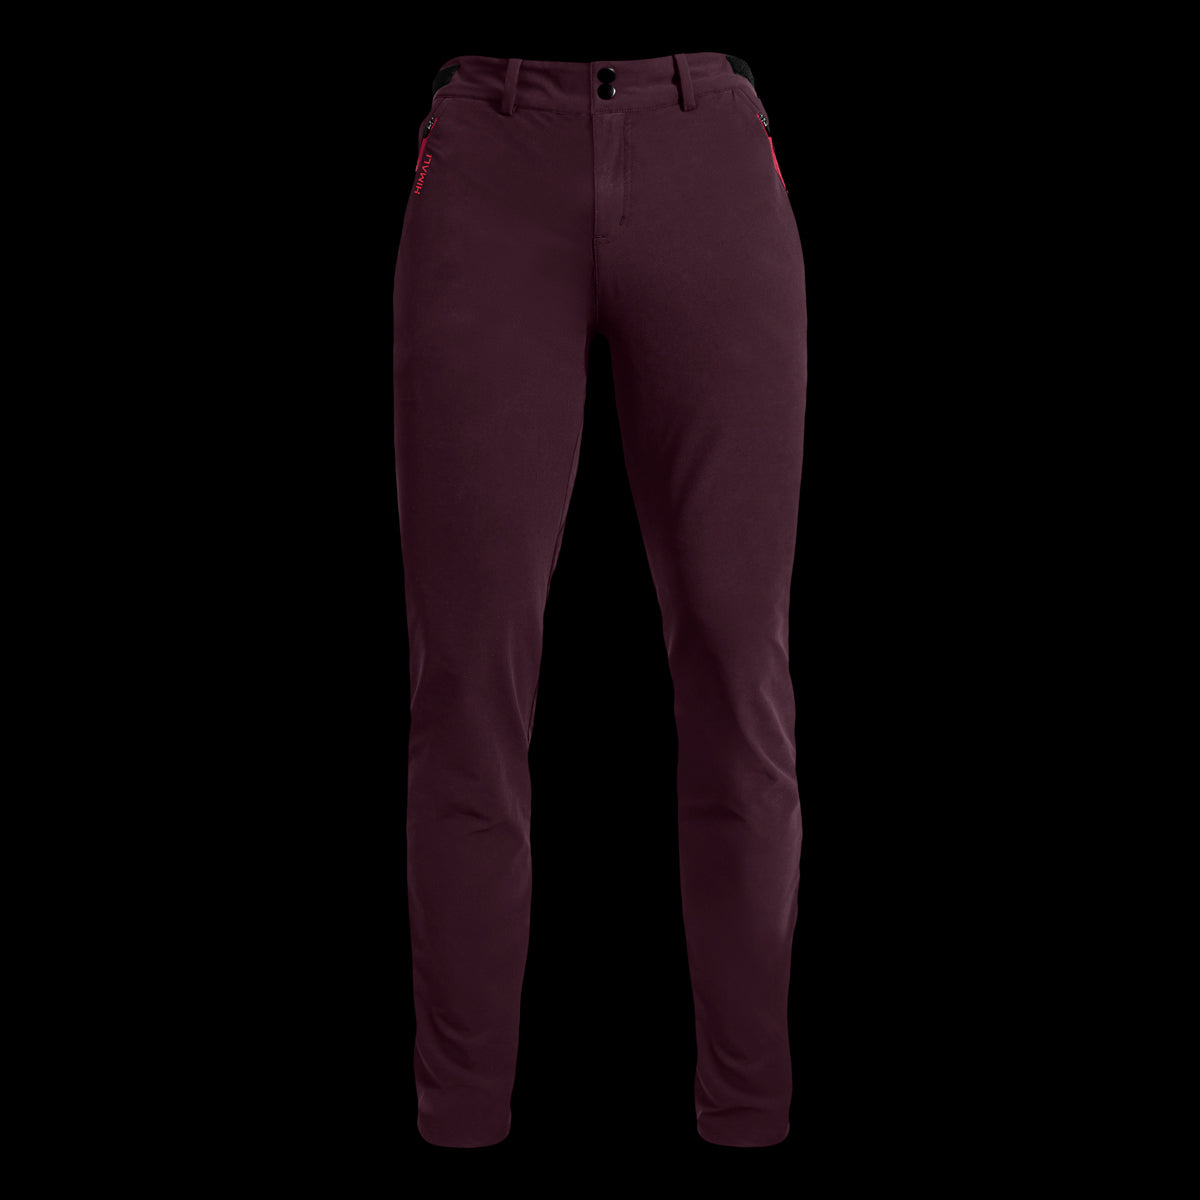 WOMENS GUIDE FLEX PANT by HIMALI